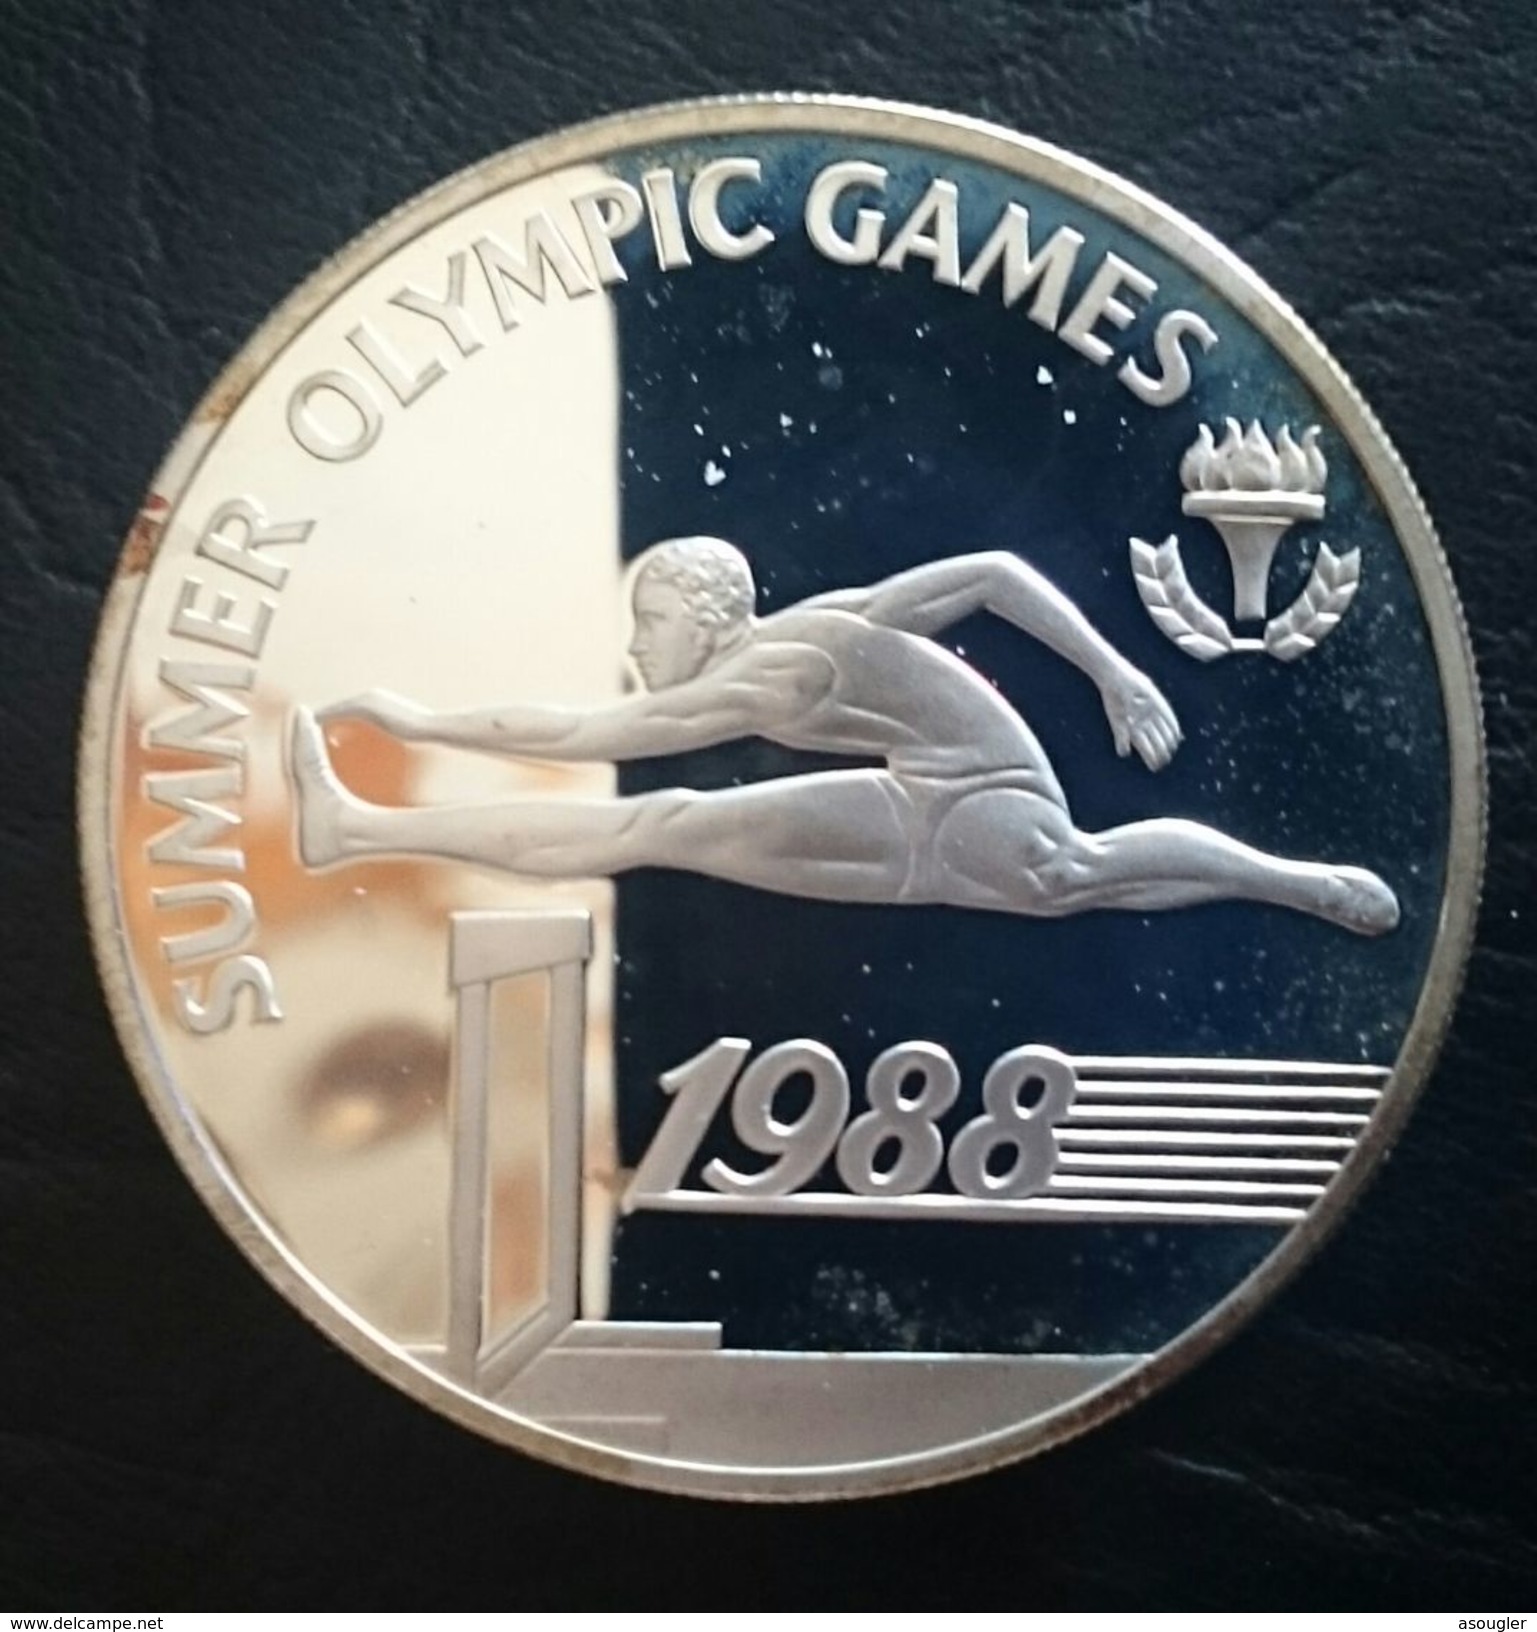 BARBADOS 20 DOLLARS 1988 SILVER PROOF "Summer Olympics Games 1988" Free Shipping Via Registered Air Mail - Barbades